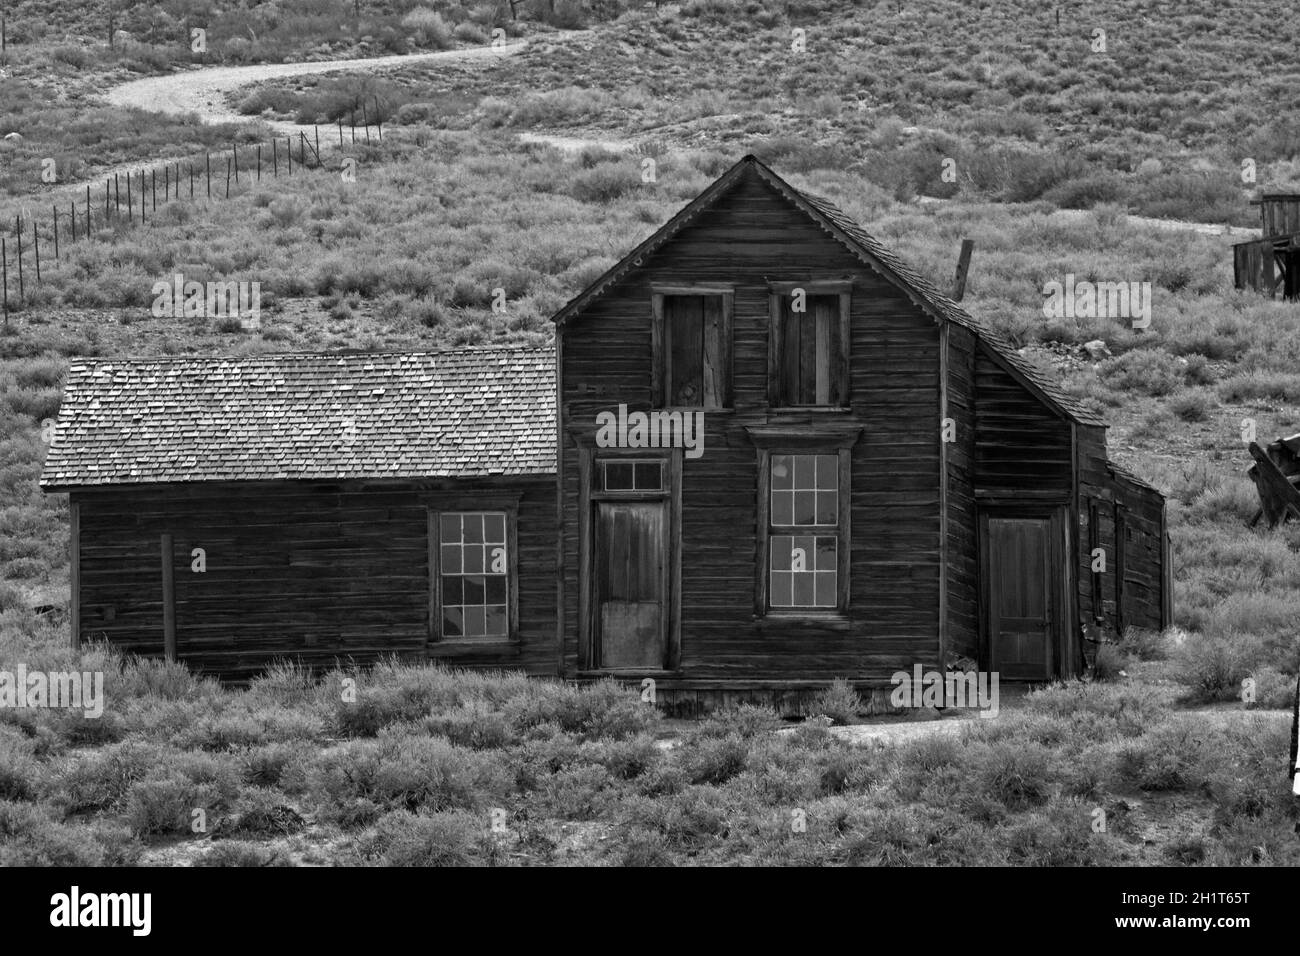 Old building in Bodie Ghost Town, Elevation 8379 ft / 2554 m, Bodie Hills, Mono County, Eastern Sierra, California, United States. Stock Photo